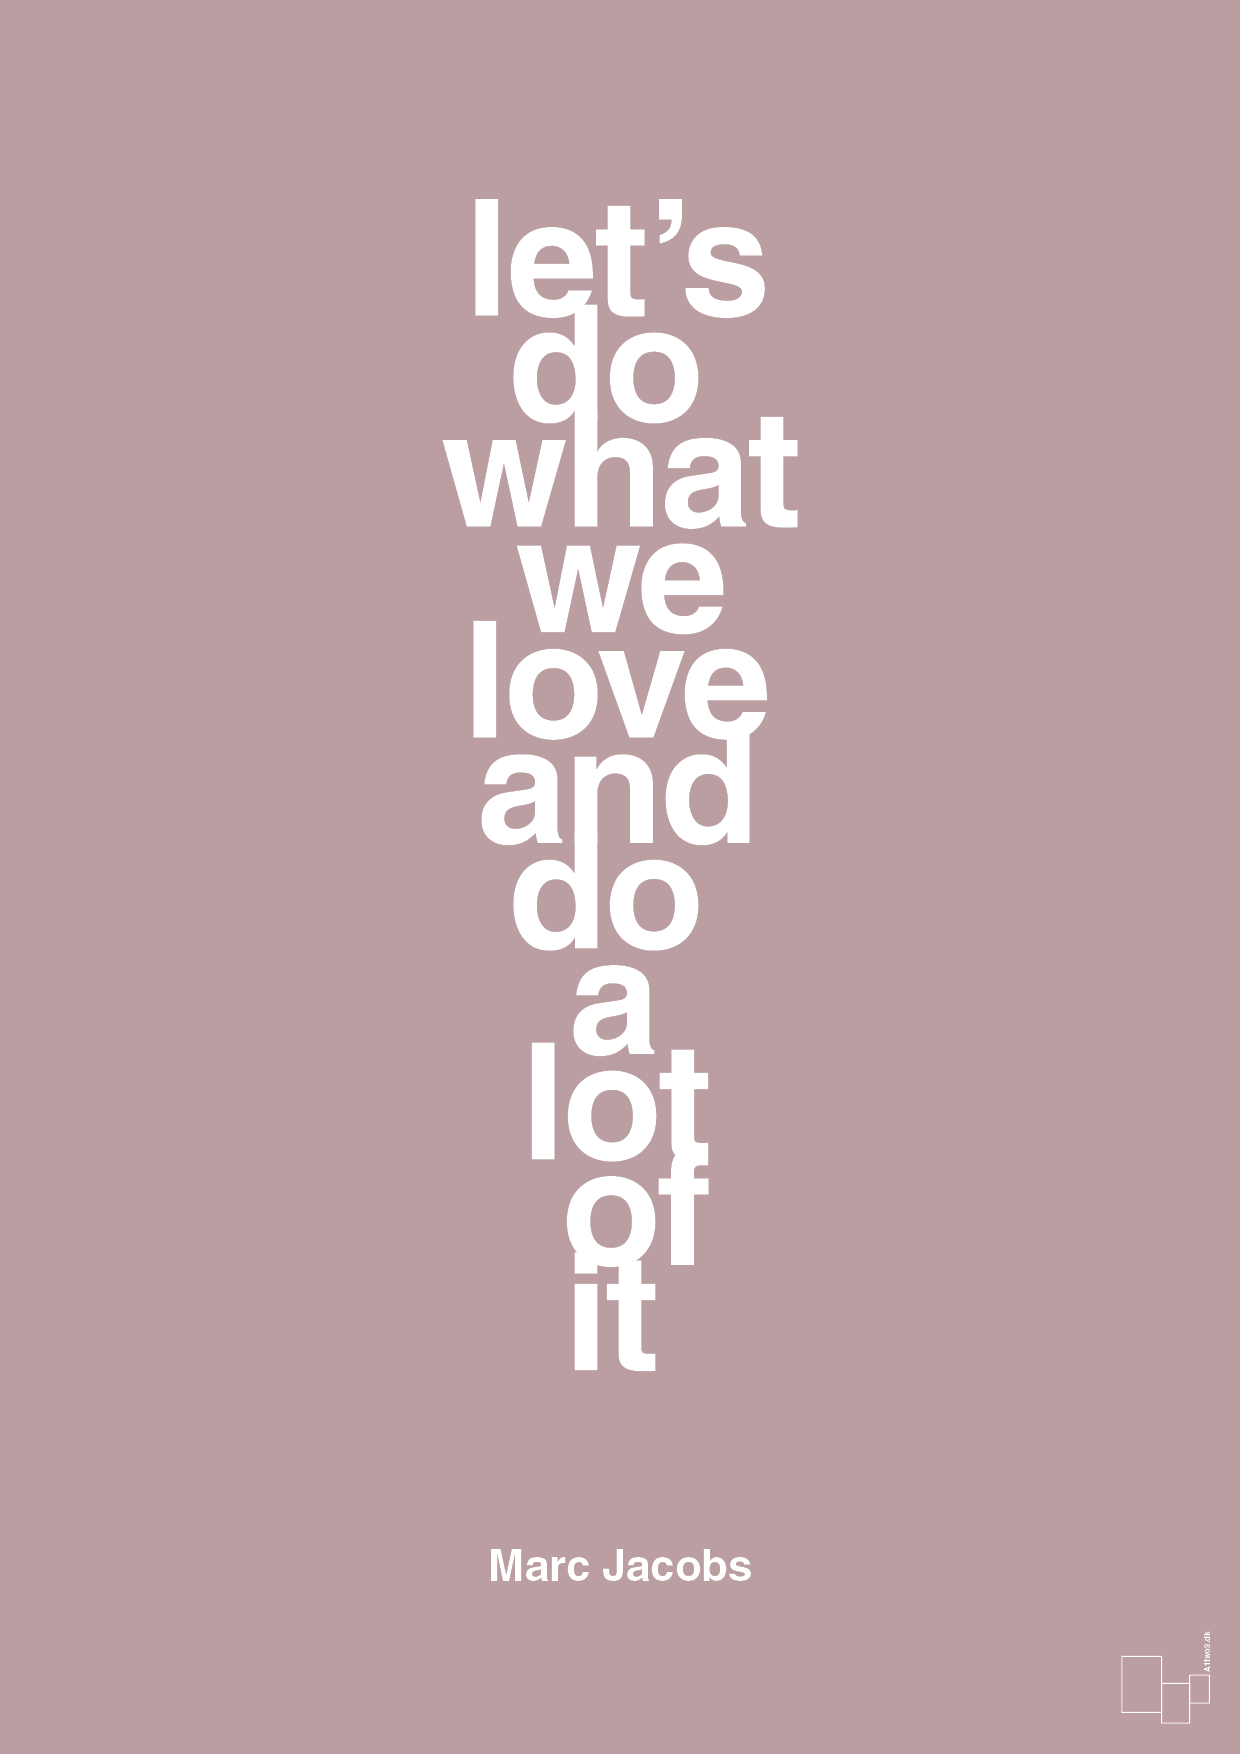 lets do what we love and do a lot of it - Plakat med Citater i Light Rose